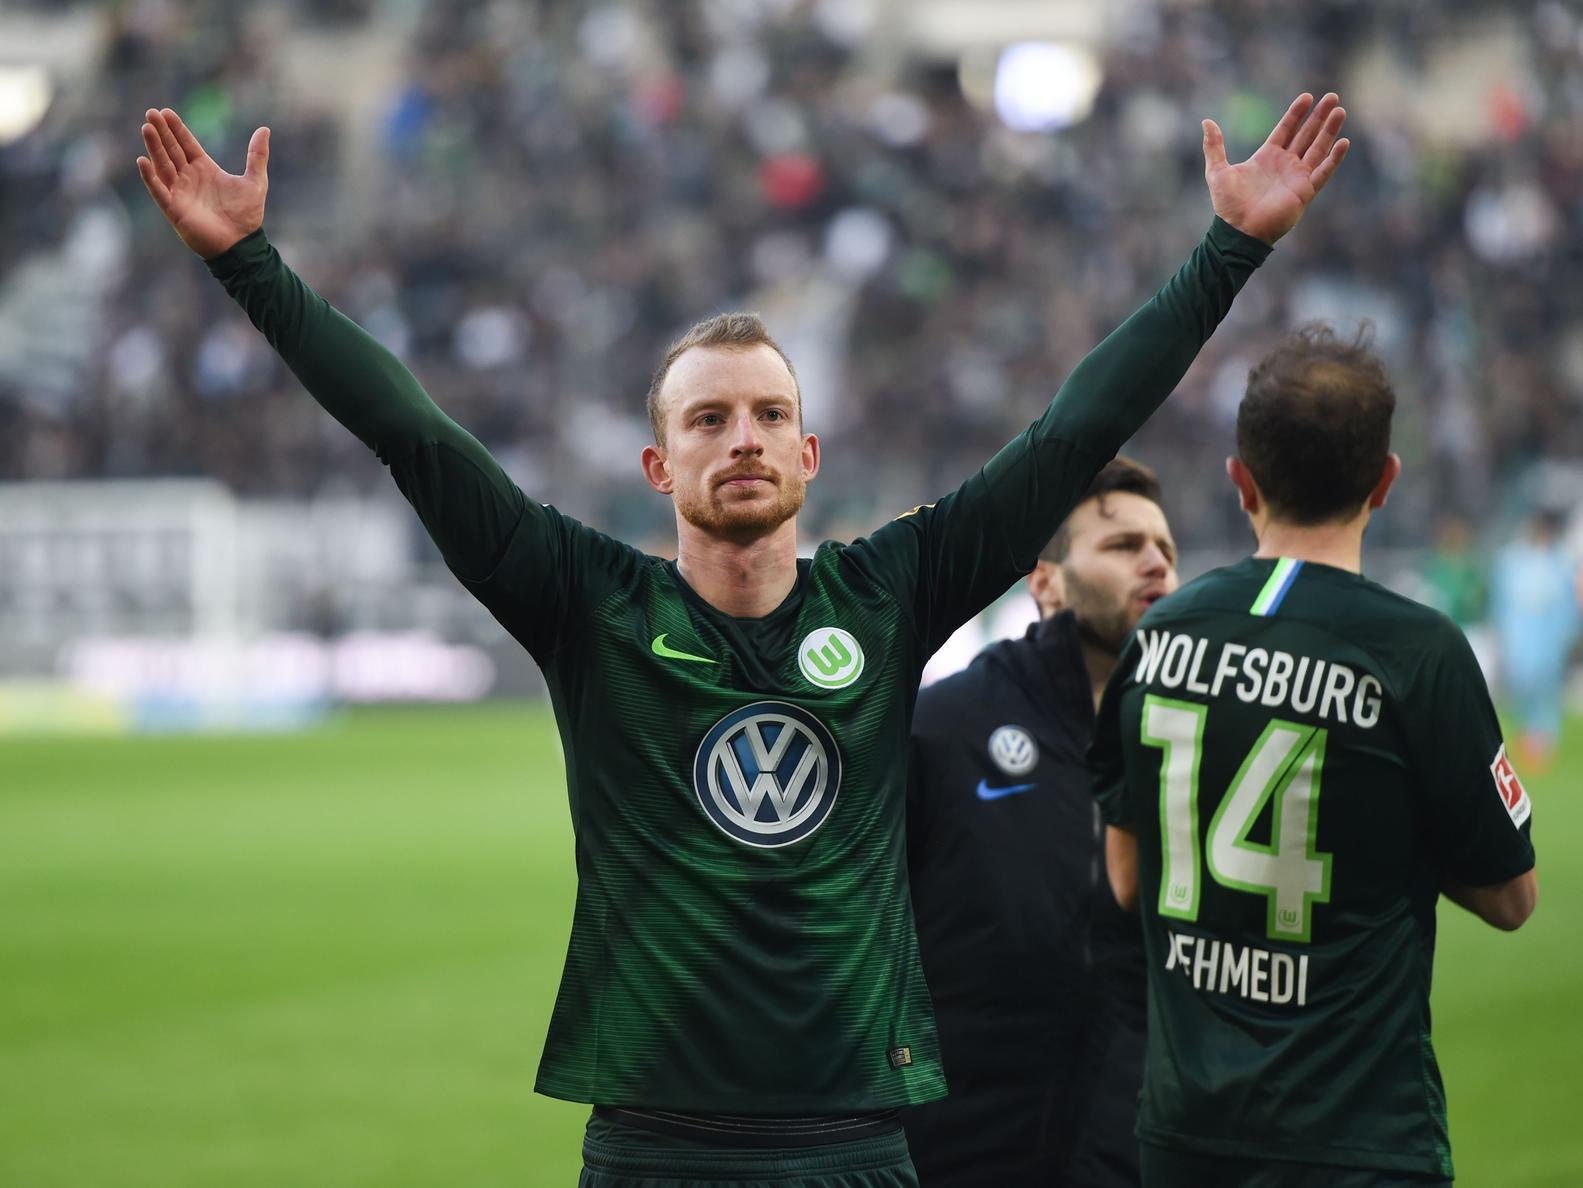 Hype around the 25-year-old has settled down in the last couple of seasons, as Germany's endless conveyor belt of talent continues to churn out new prospects. Arnold is a classy midfielder, and would flourish in England.